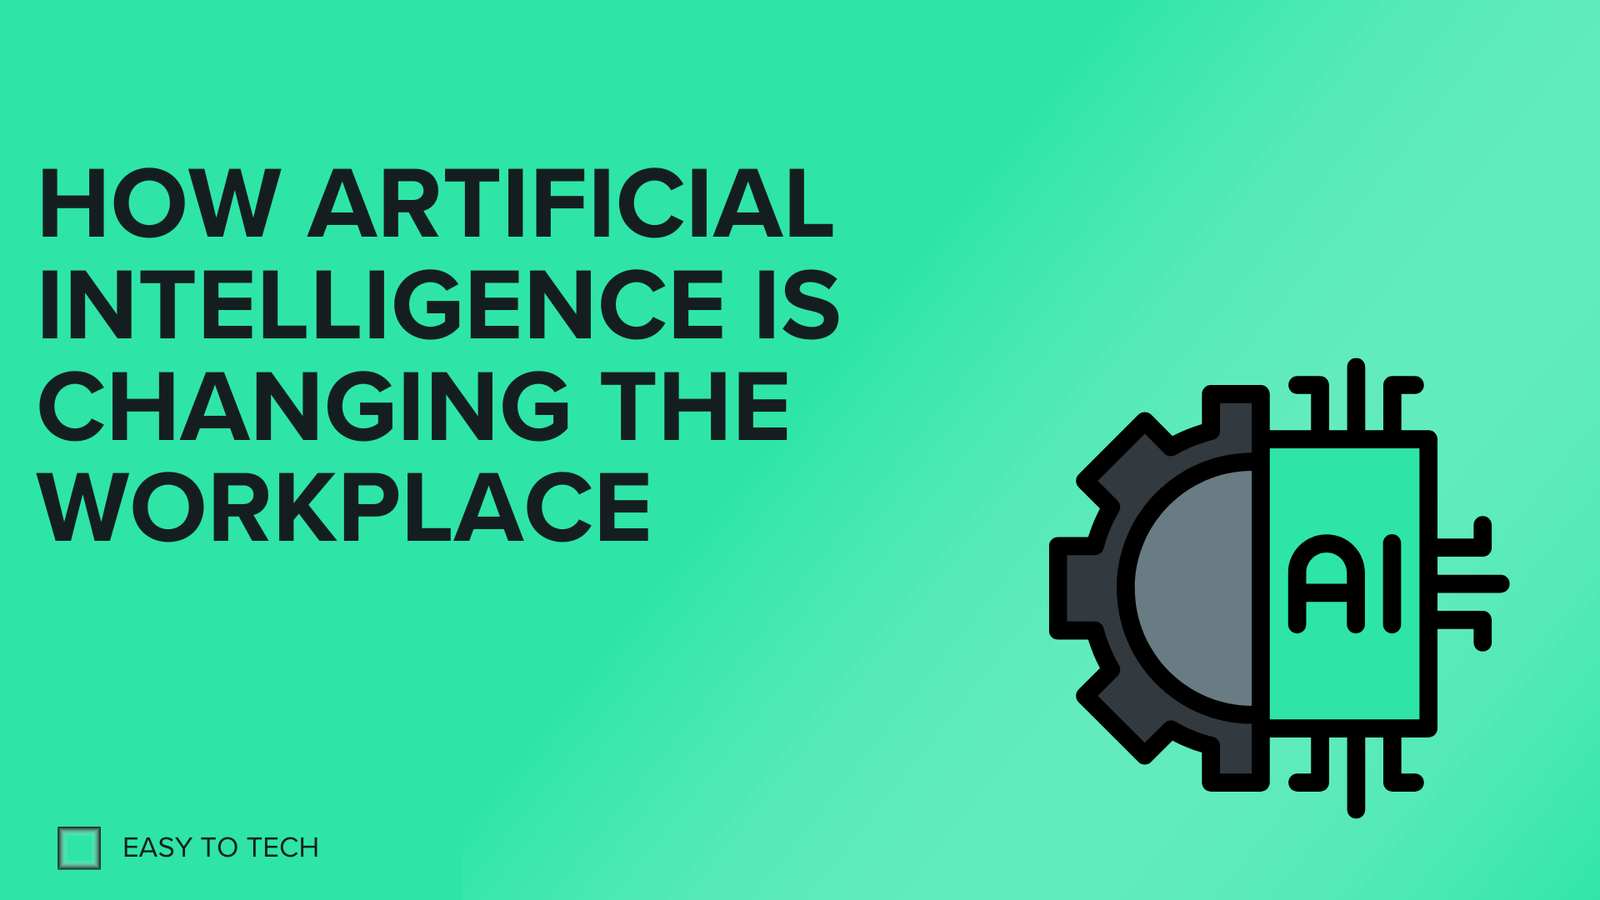 HOW ARTIFICIAL INTELLIGENCE IS CHANGING THE WORKPLACE